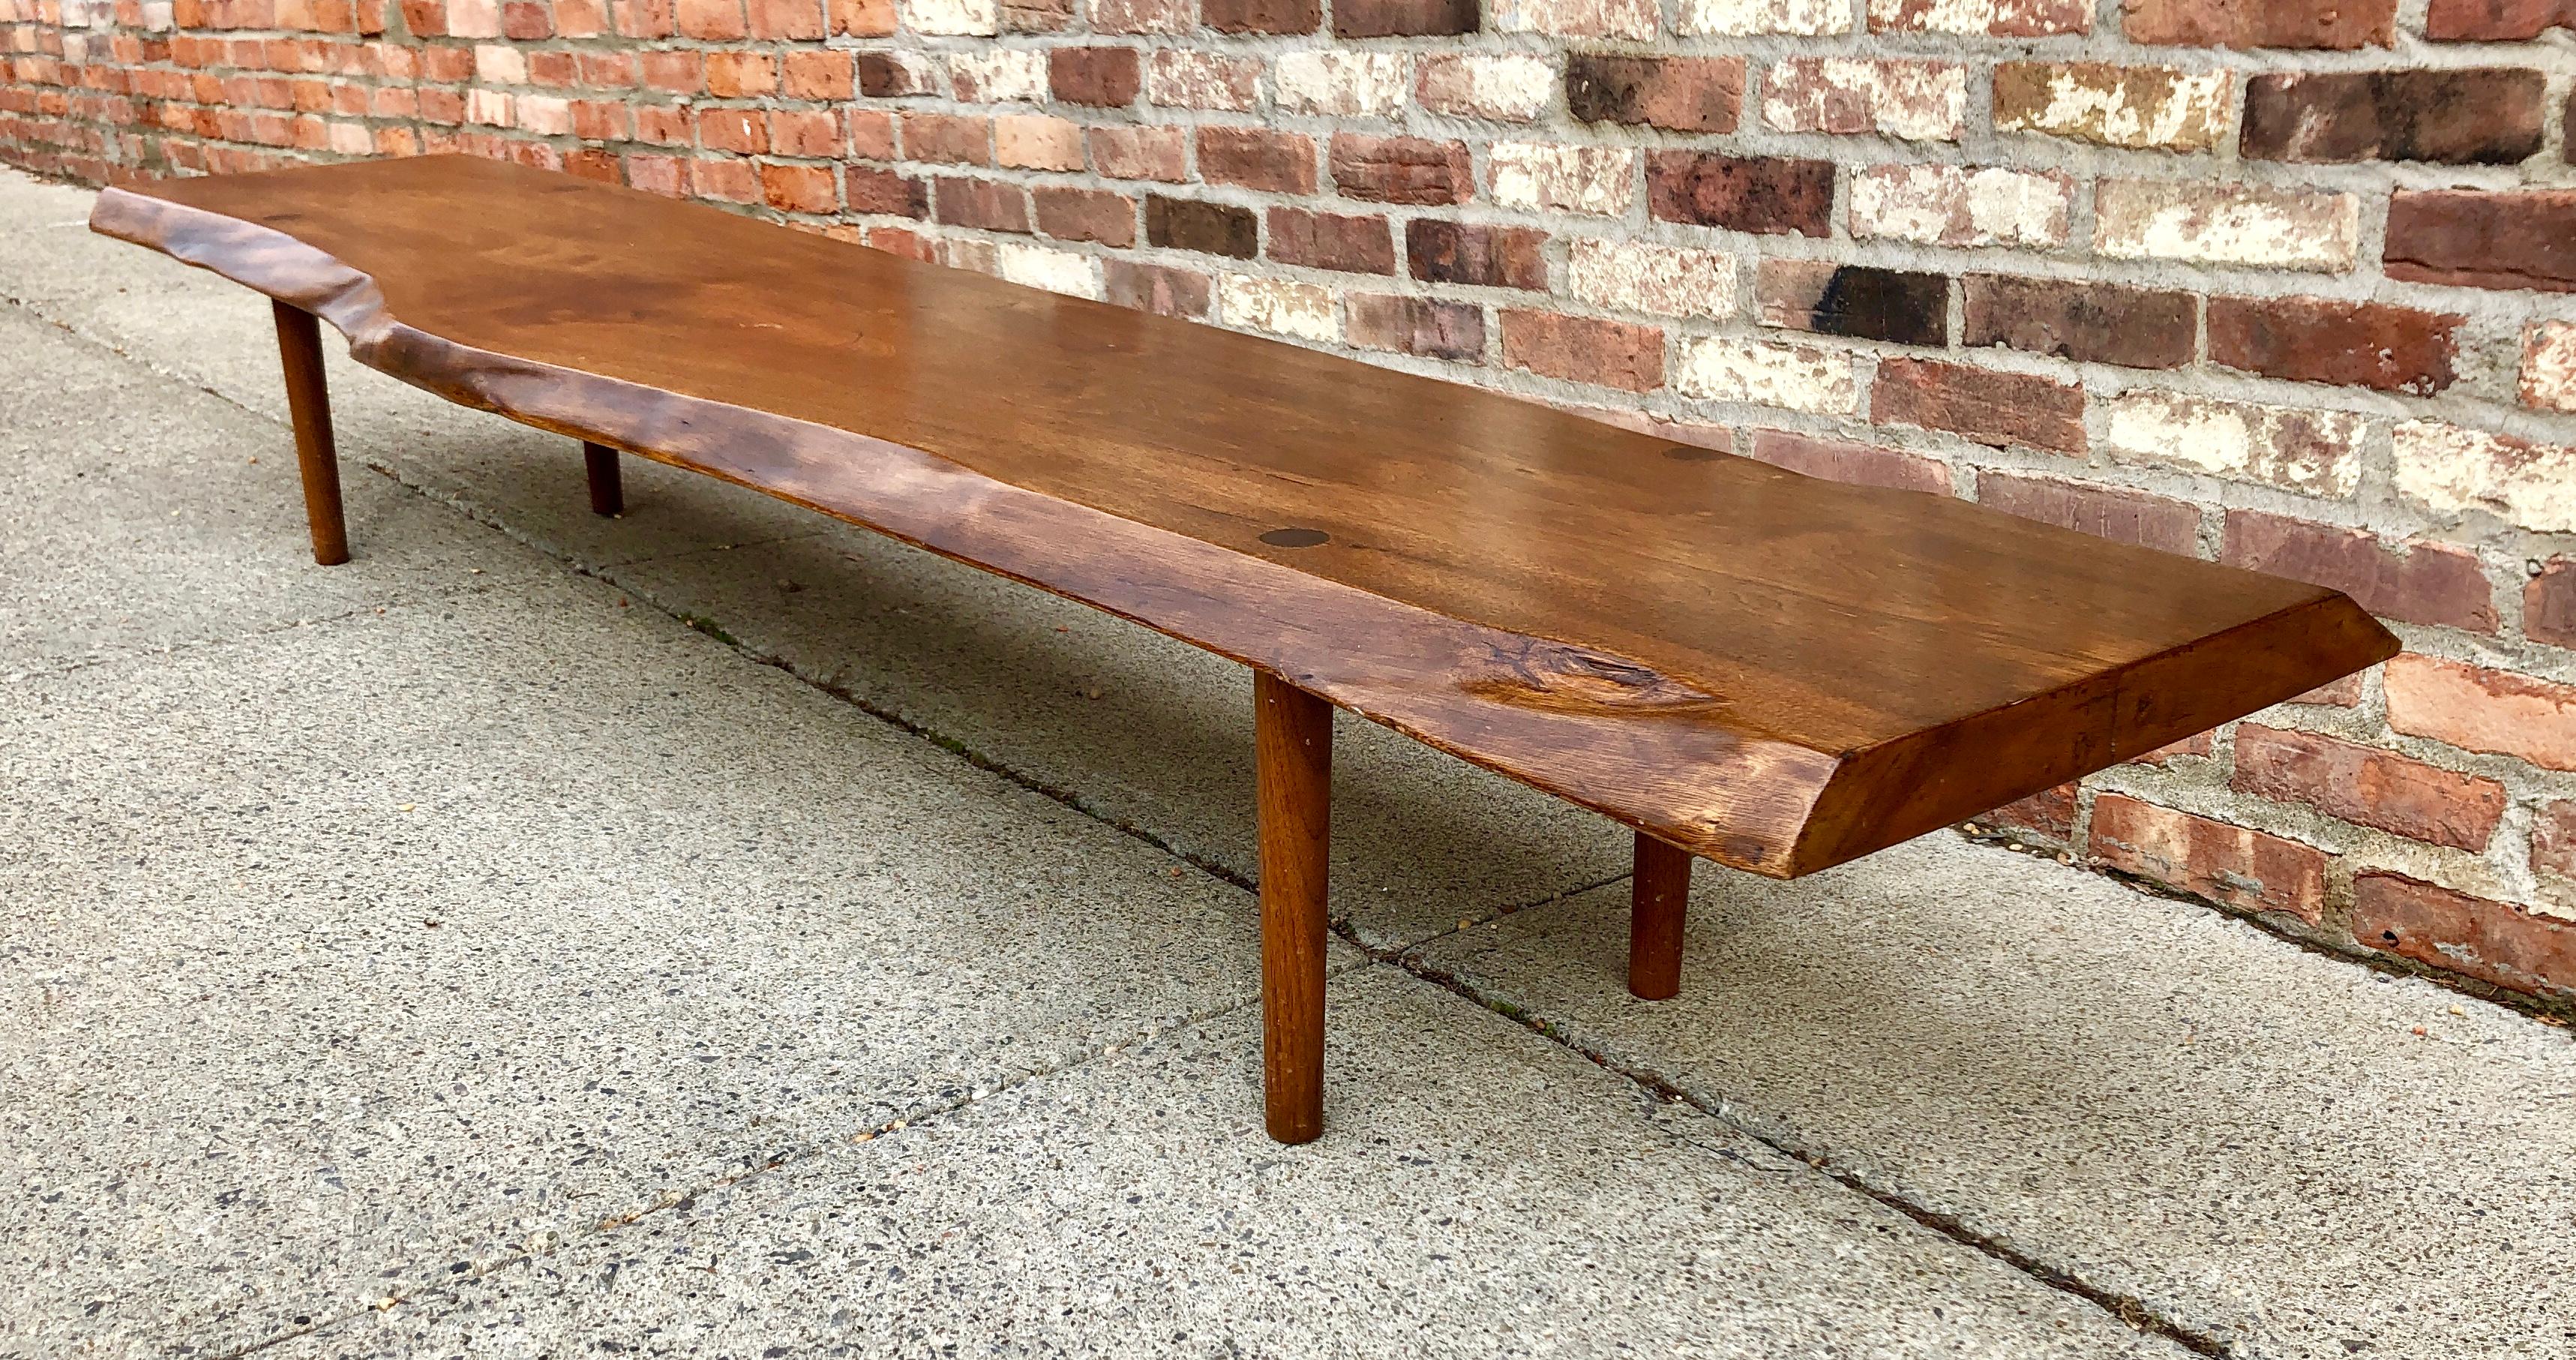 Nakashima style long bench with free-edge and thru-tenon details, circa 1960s. Nice old linseed oil finish. Unsigned.